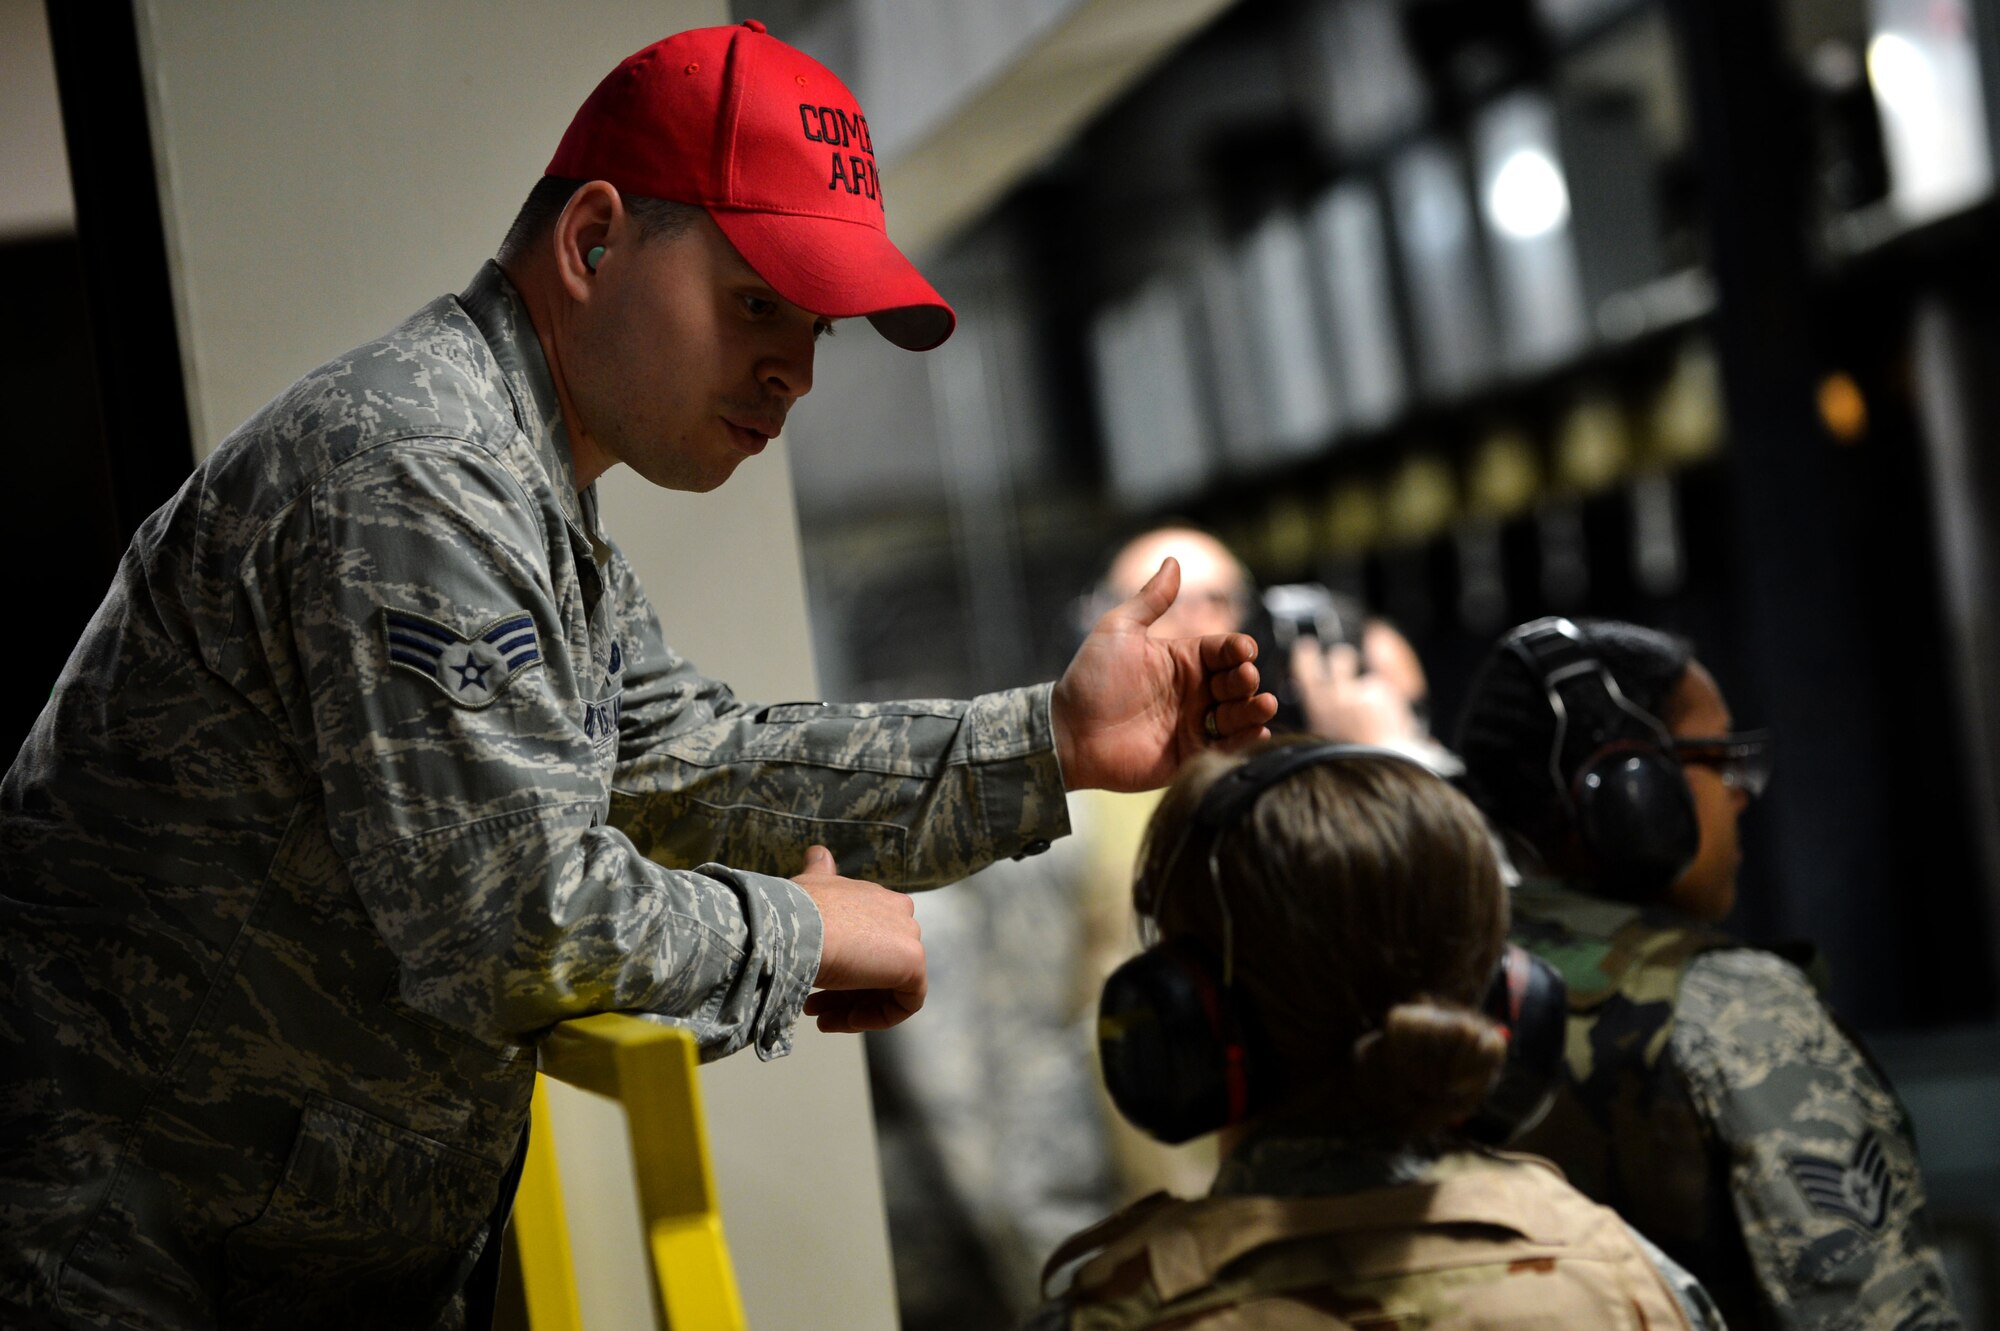 U.S. Air Force Senior Airman Robert Riley, 20th Security Forces Squadron combat arms instructor, gives directions to a Team Shaw member before firing an M4 carbine during combat arms training at Shaw Air Force Base, S.C., March 8, 2016. CATM instructors are in charge of ensuring that service members qualify on shooting various weapons before they deploy or leave Shaw. (U.S. Air Force photo by Senior Airman Michael Cossaboom)